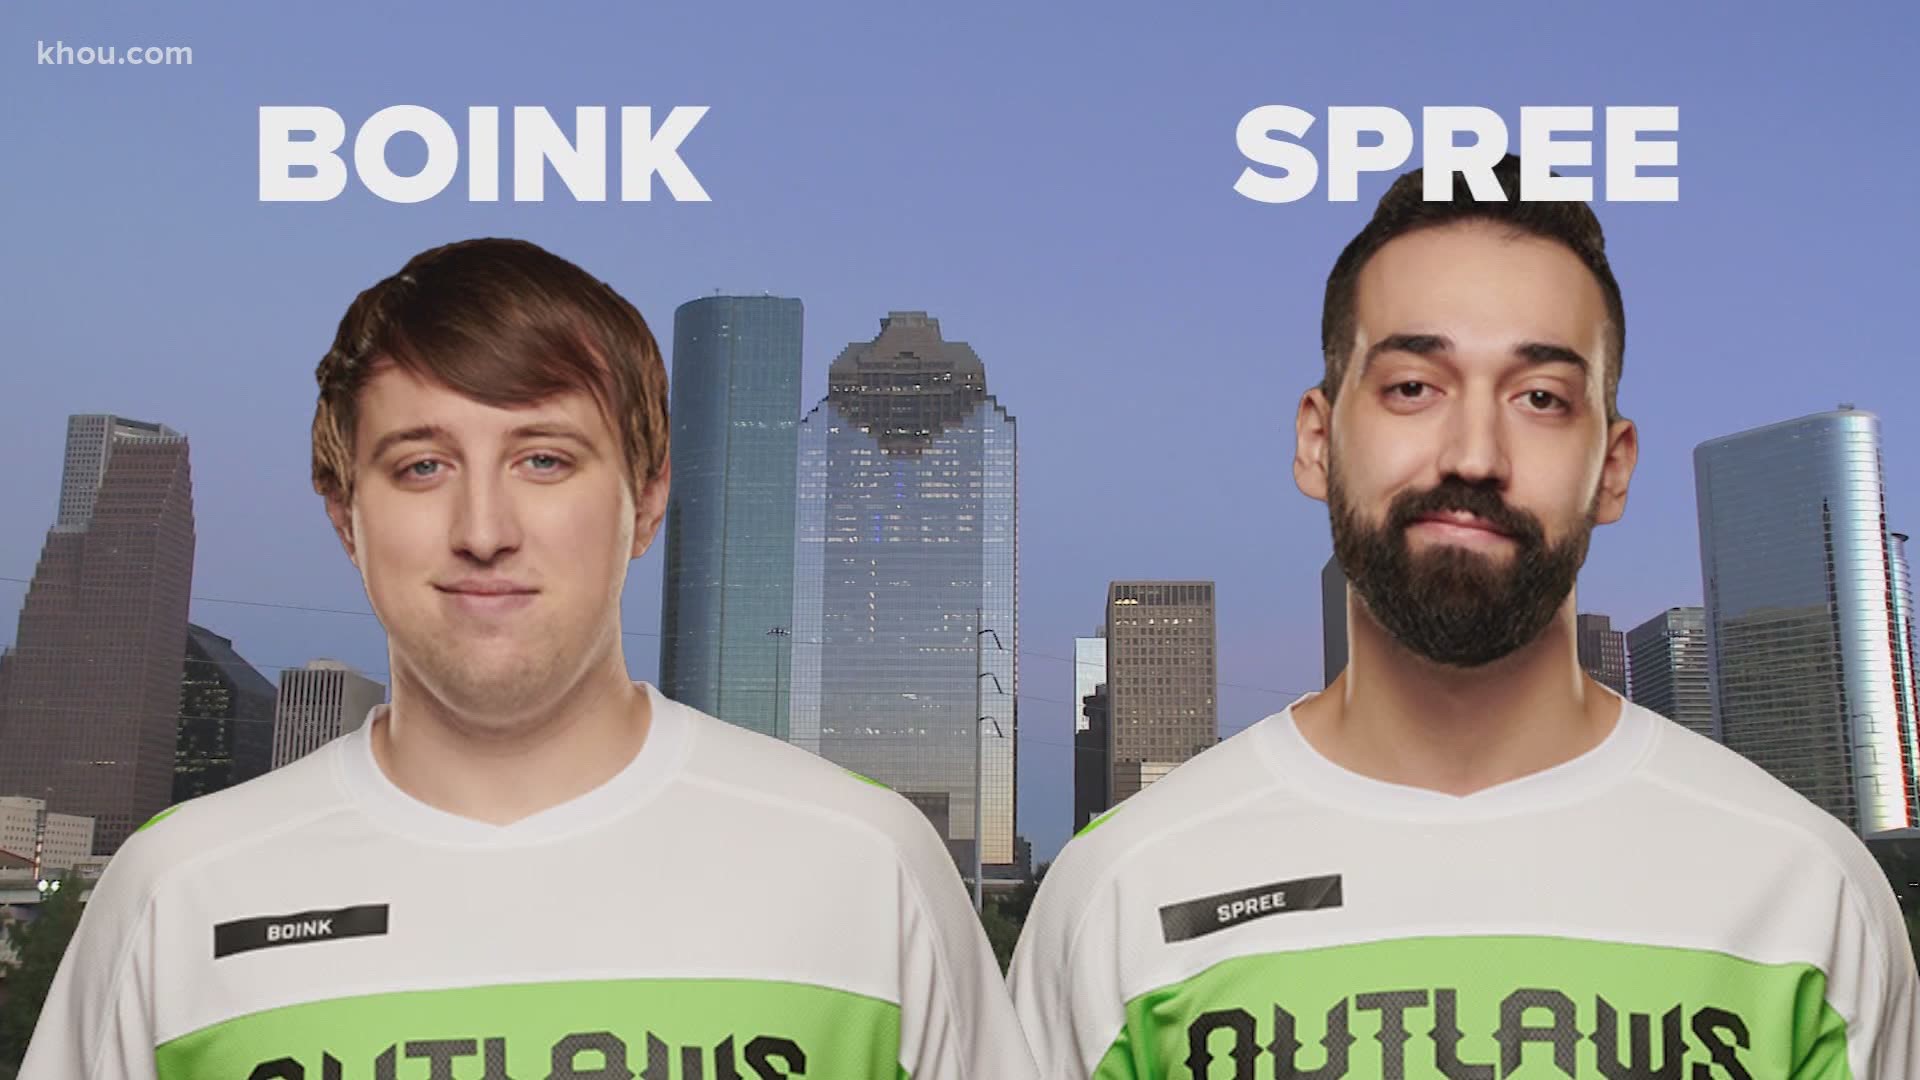 The Houston Outlaws are the winners of the first Lone Star Challenge, beating the Dallas Fuel in the Overwatch League.